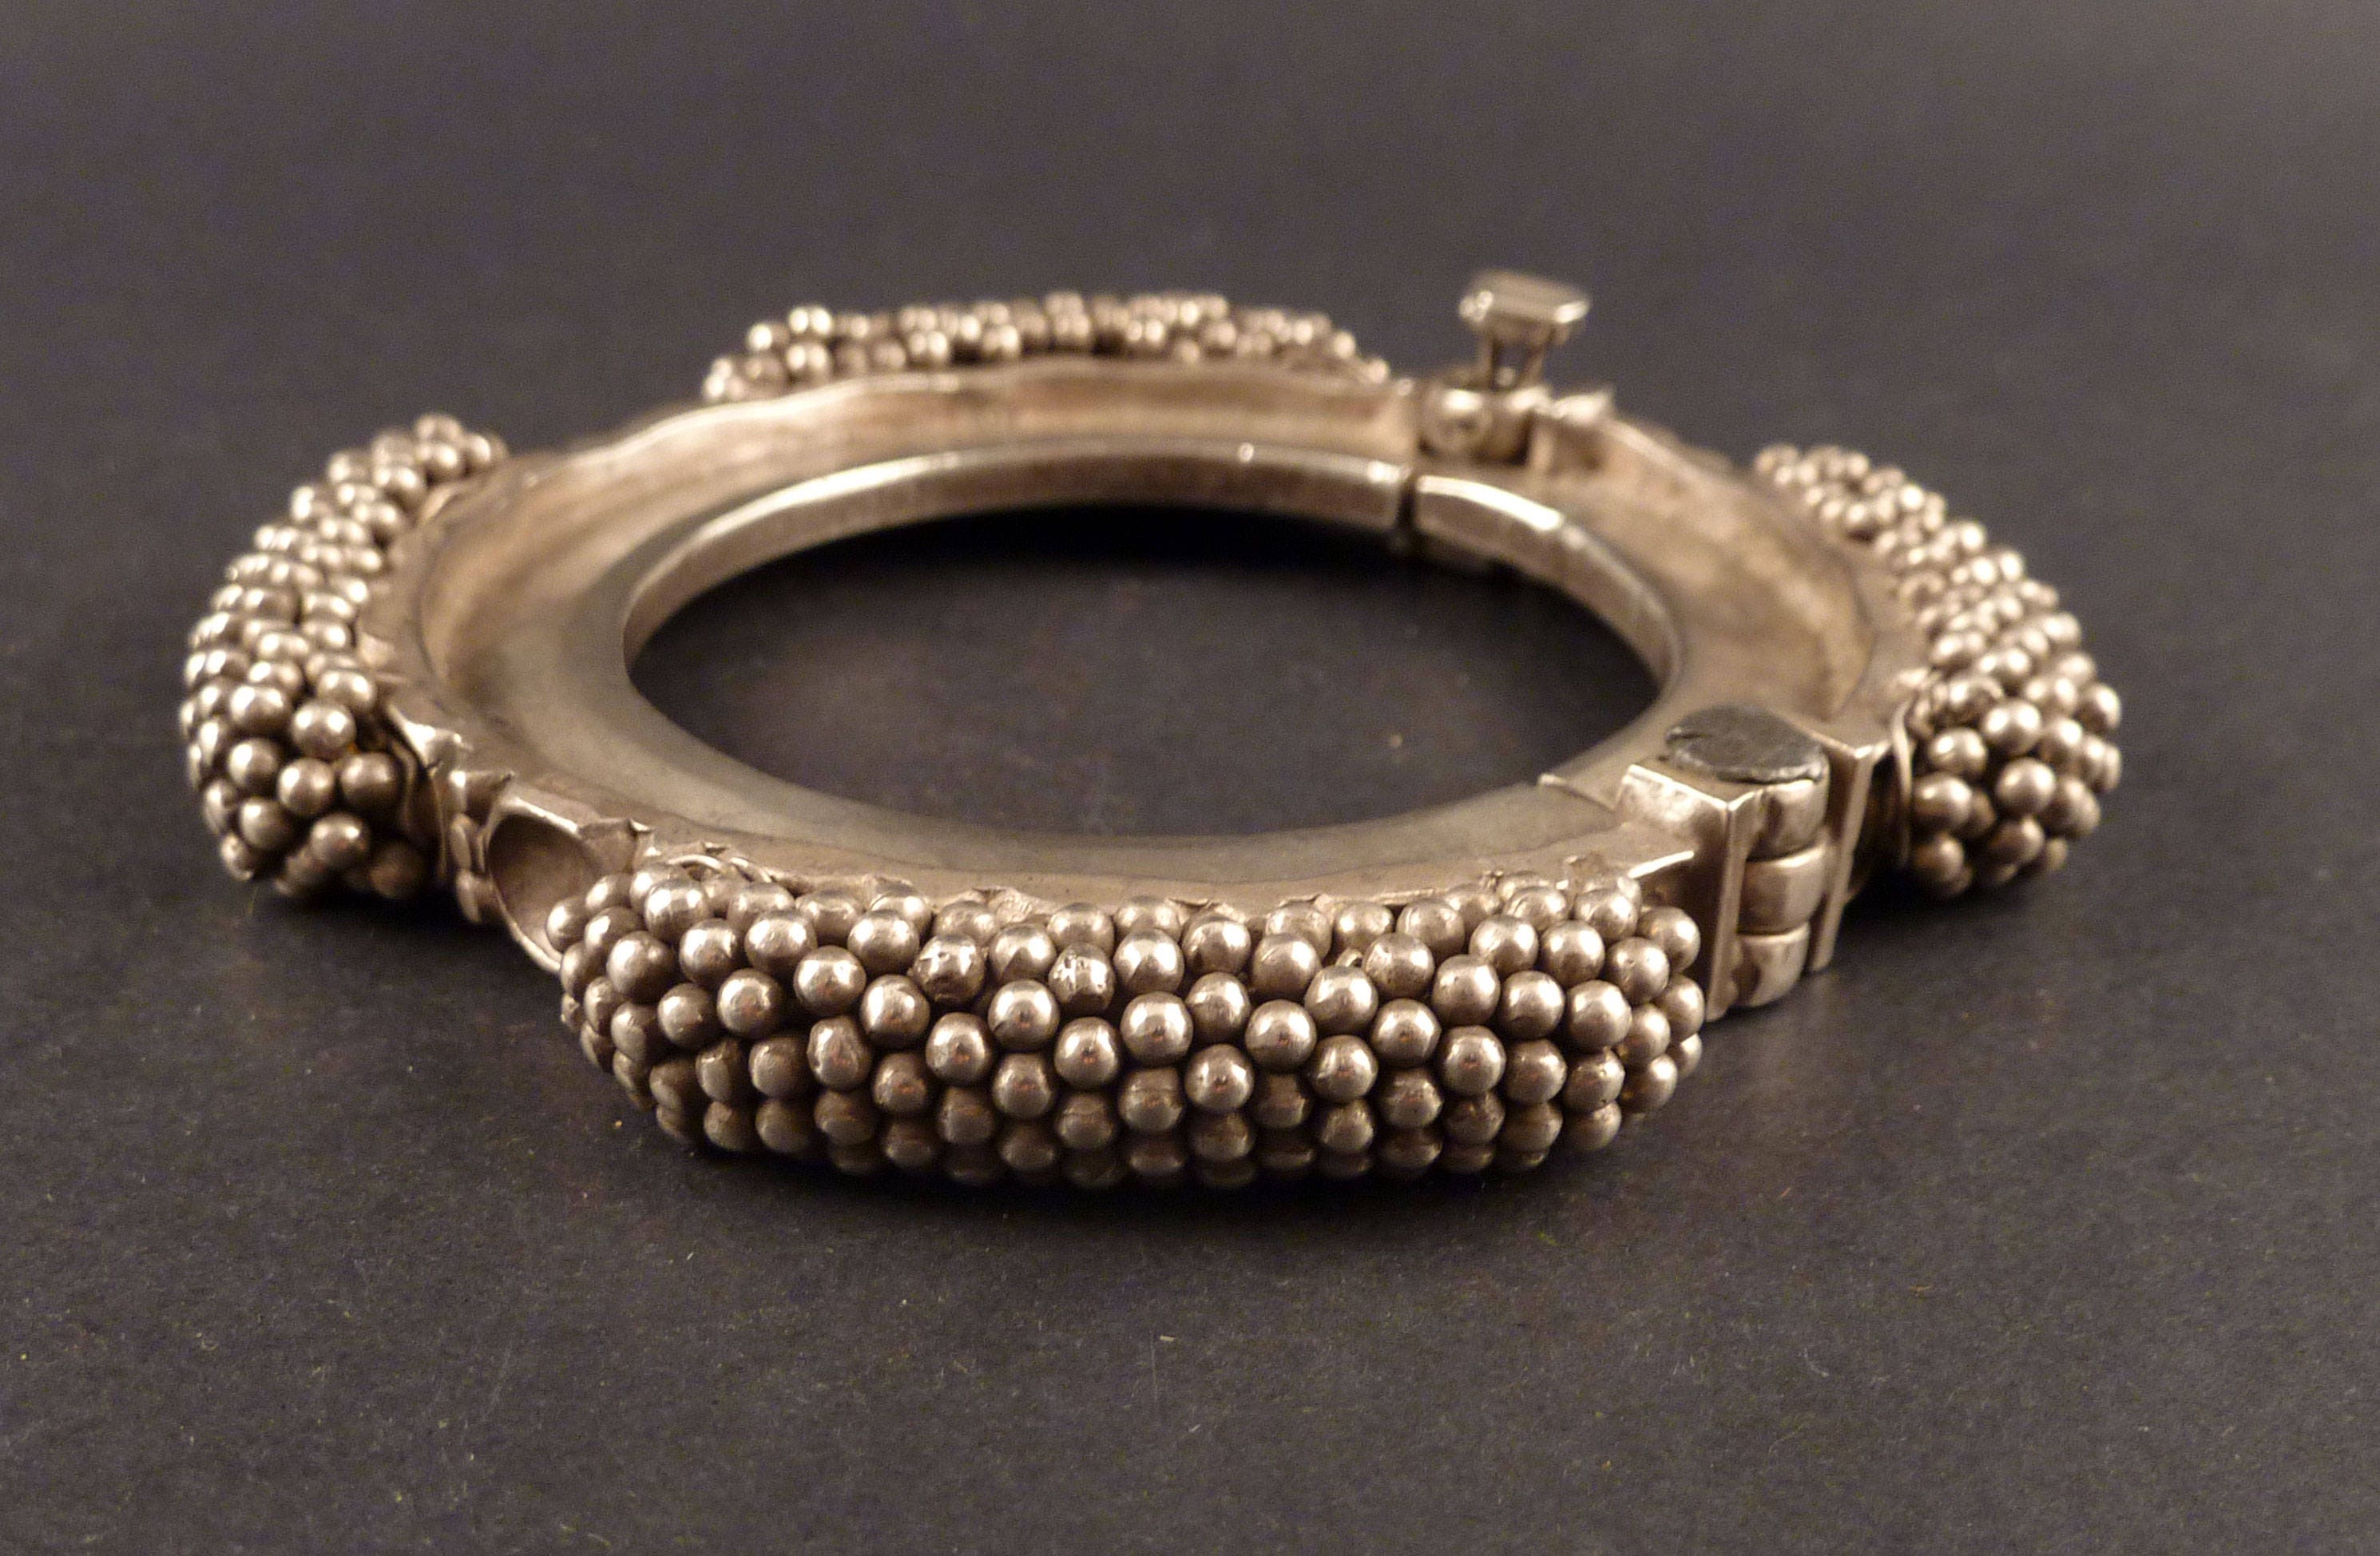 Antique Silver Upper Arm Bracelet from Rajasthan, India – Anteeka